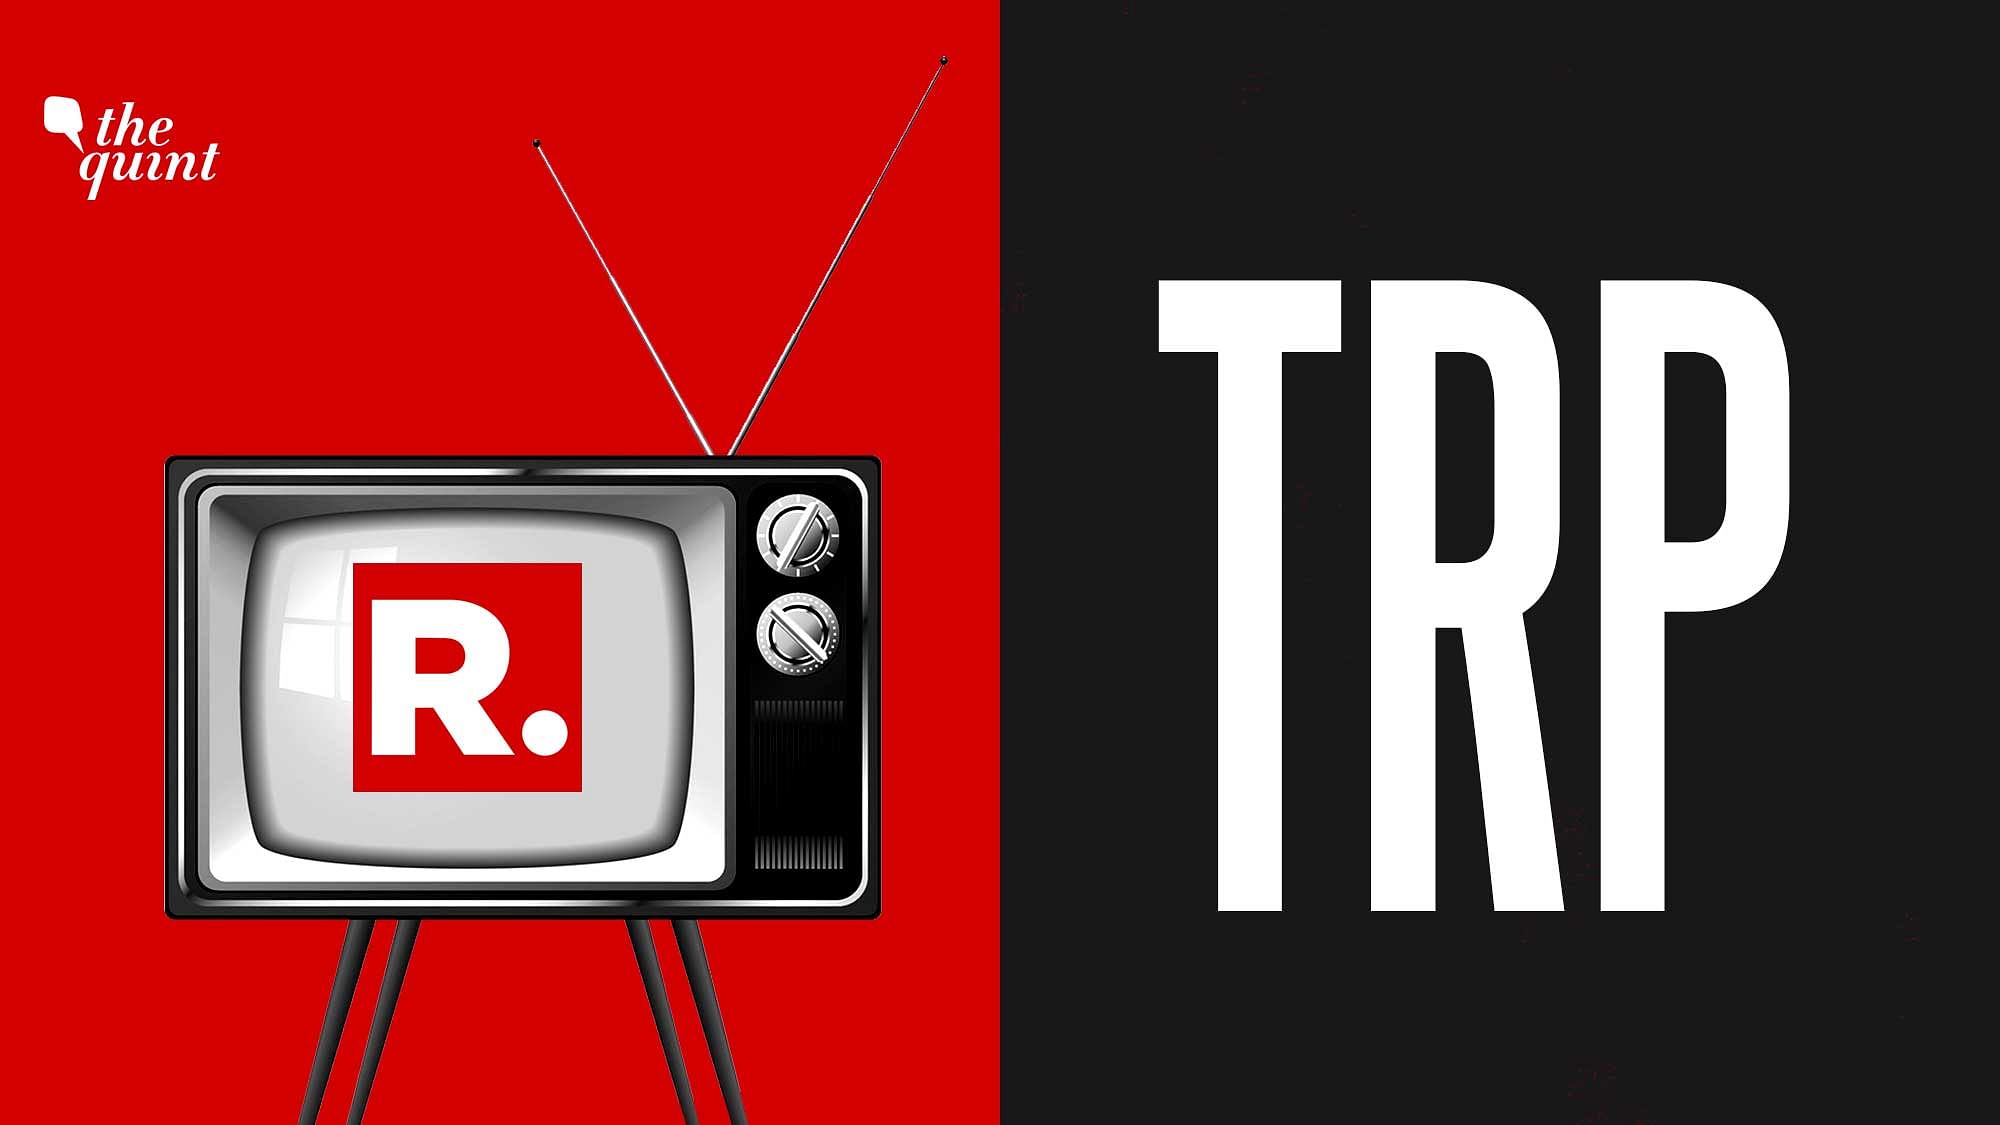 The Mumbai Police crime branch had summoned the Chief Financial Officer (CFO) of Republic TV, S Sundaram, in connection with the <a href="https://www.thequint.com/news/india/mumbai-police-busts-trp-scam-names-republic-tv">rigged TRPs case</a>. 